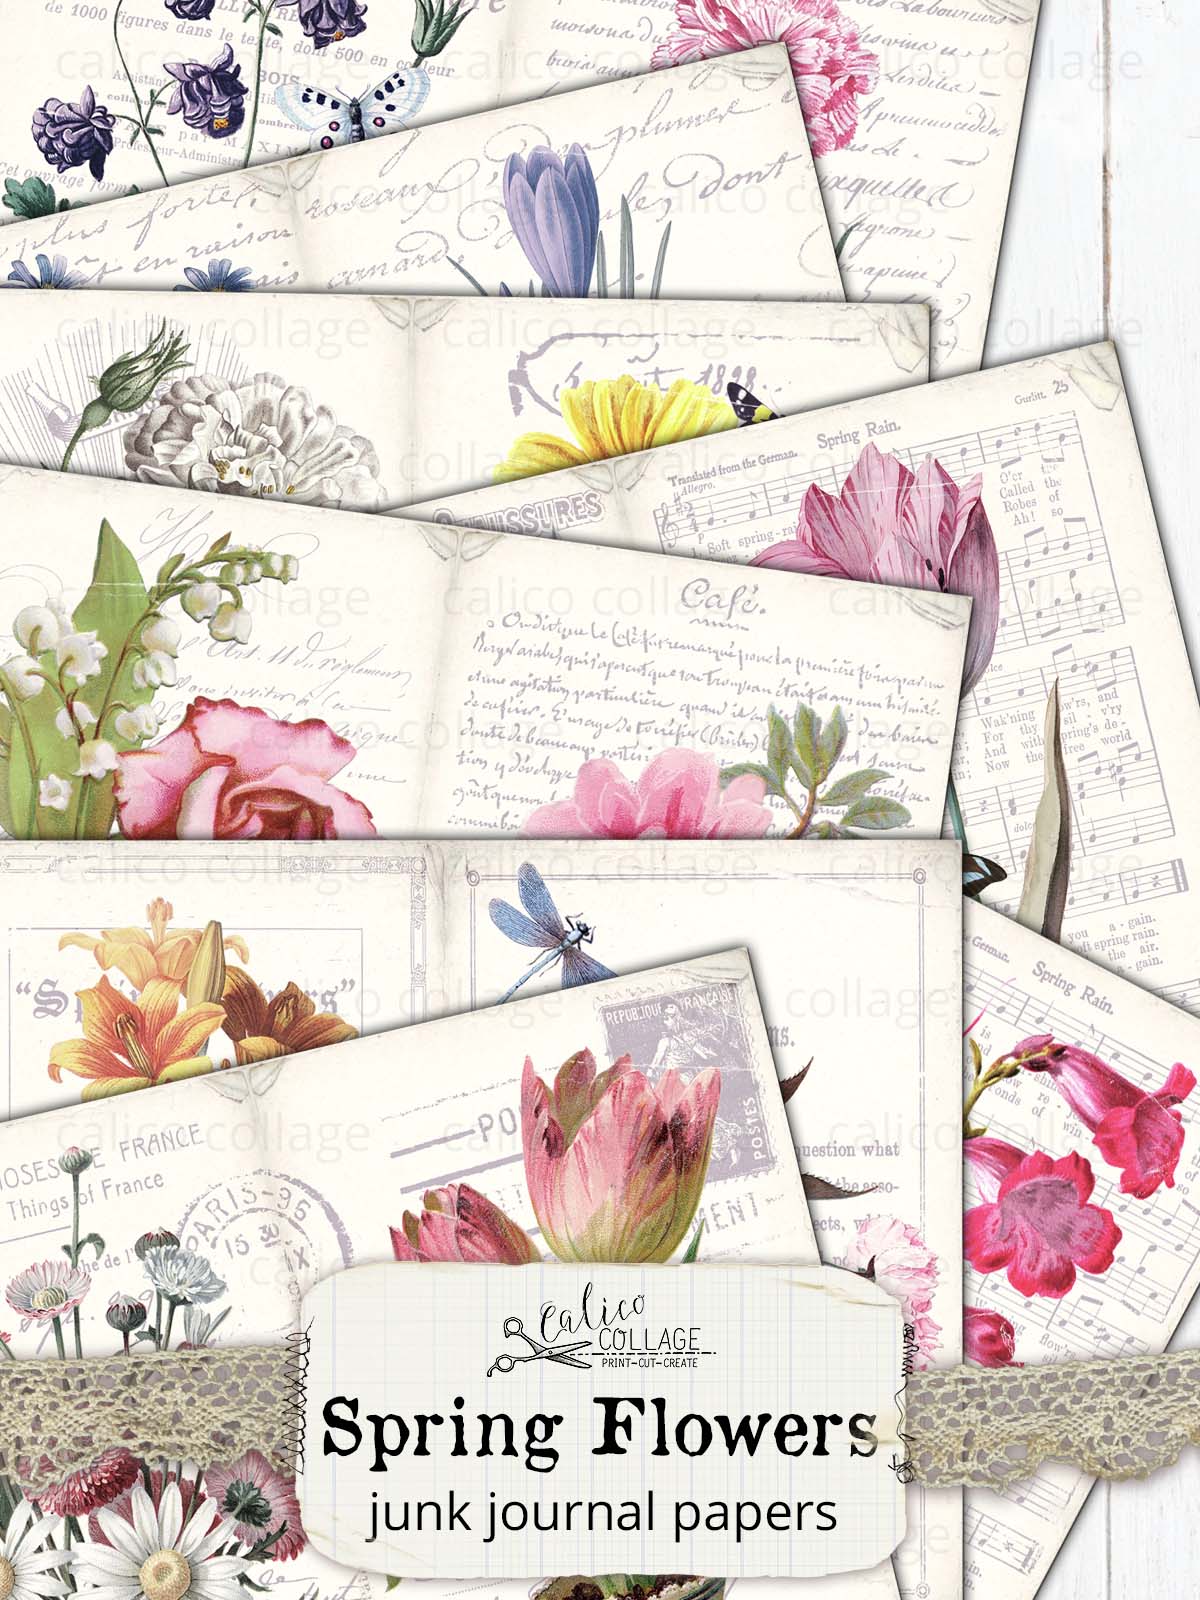 Spring Flowers Junk Journal Papers